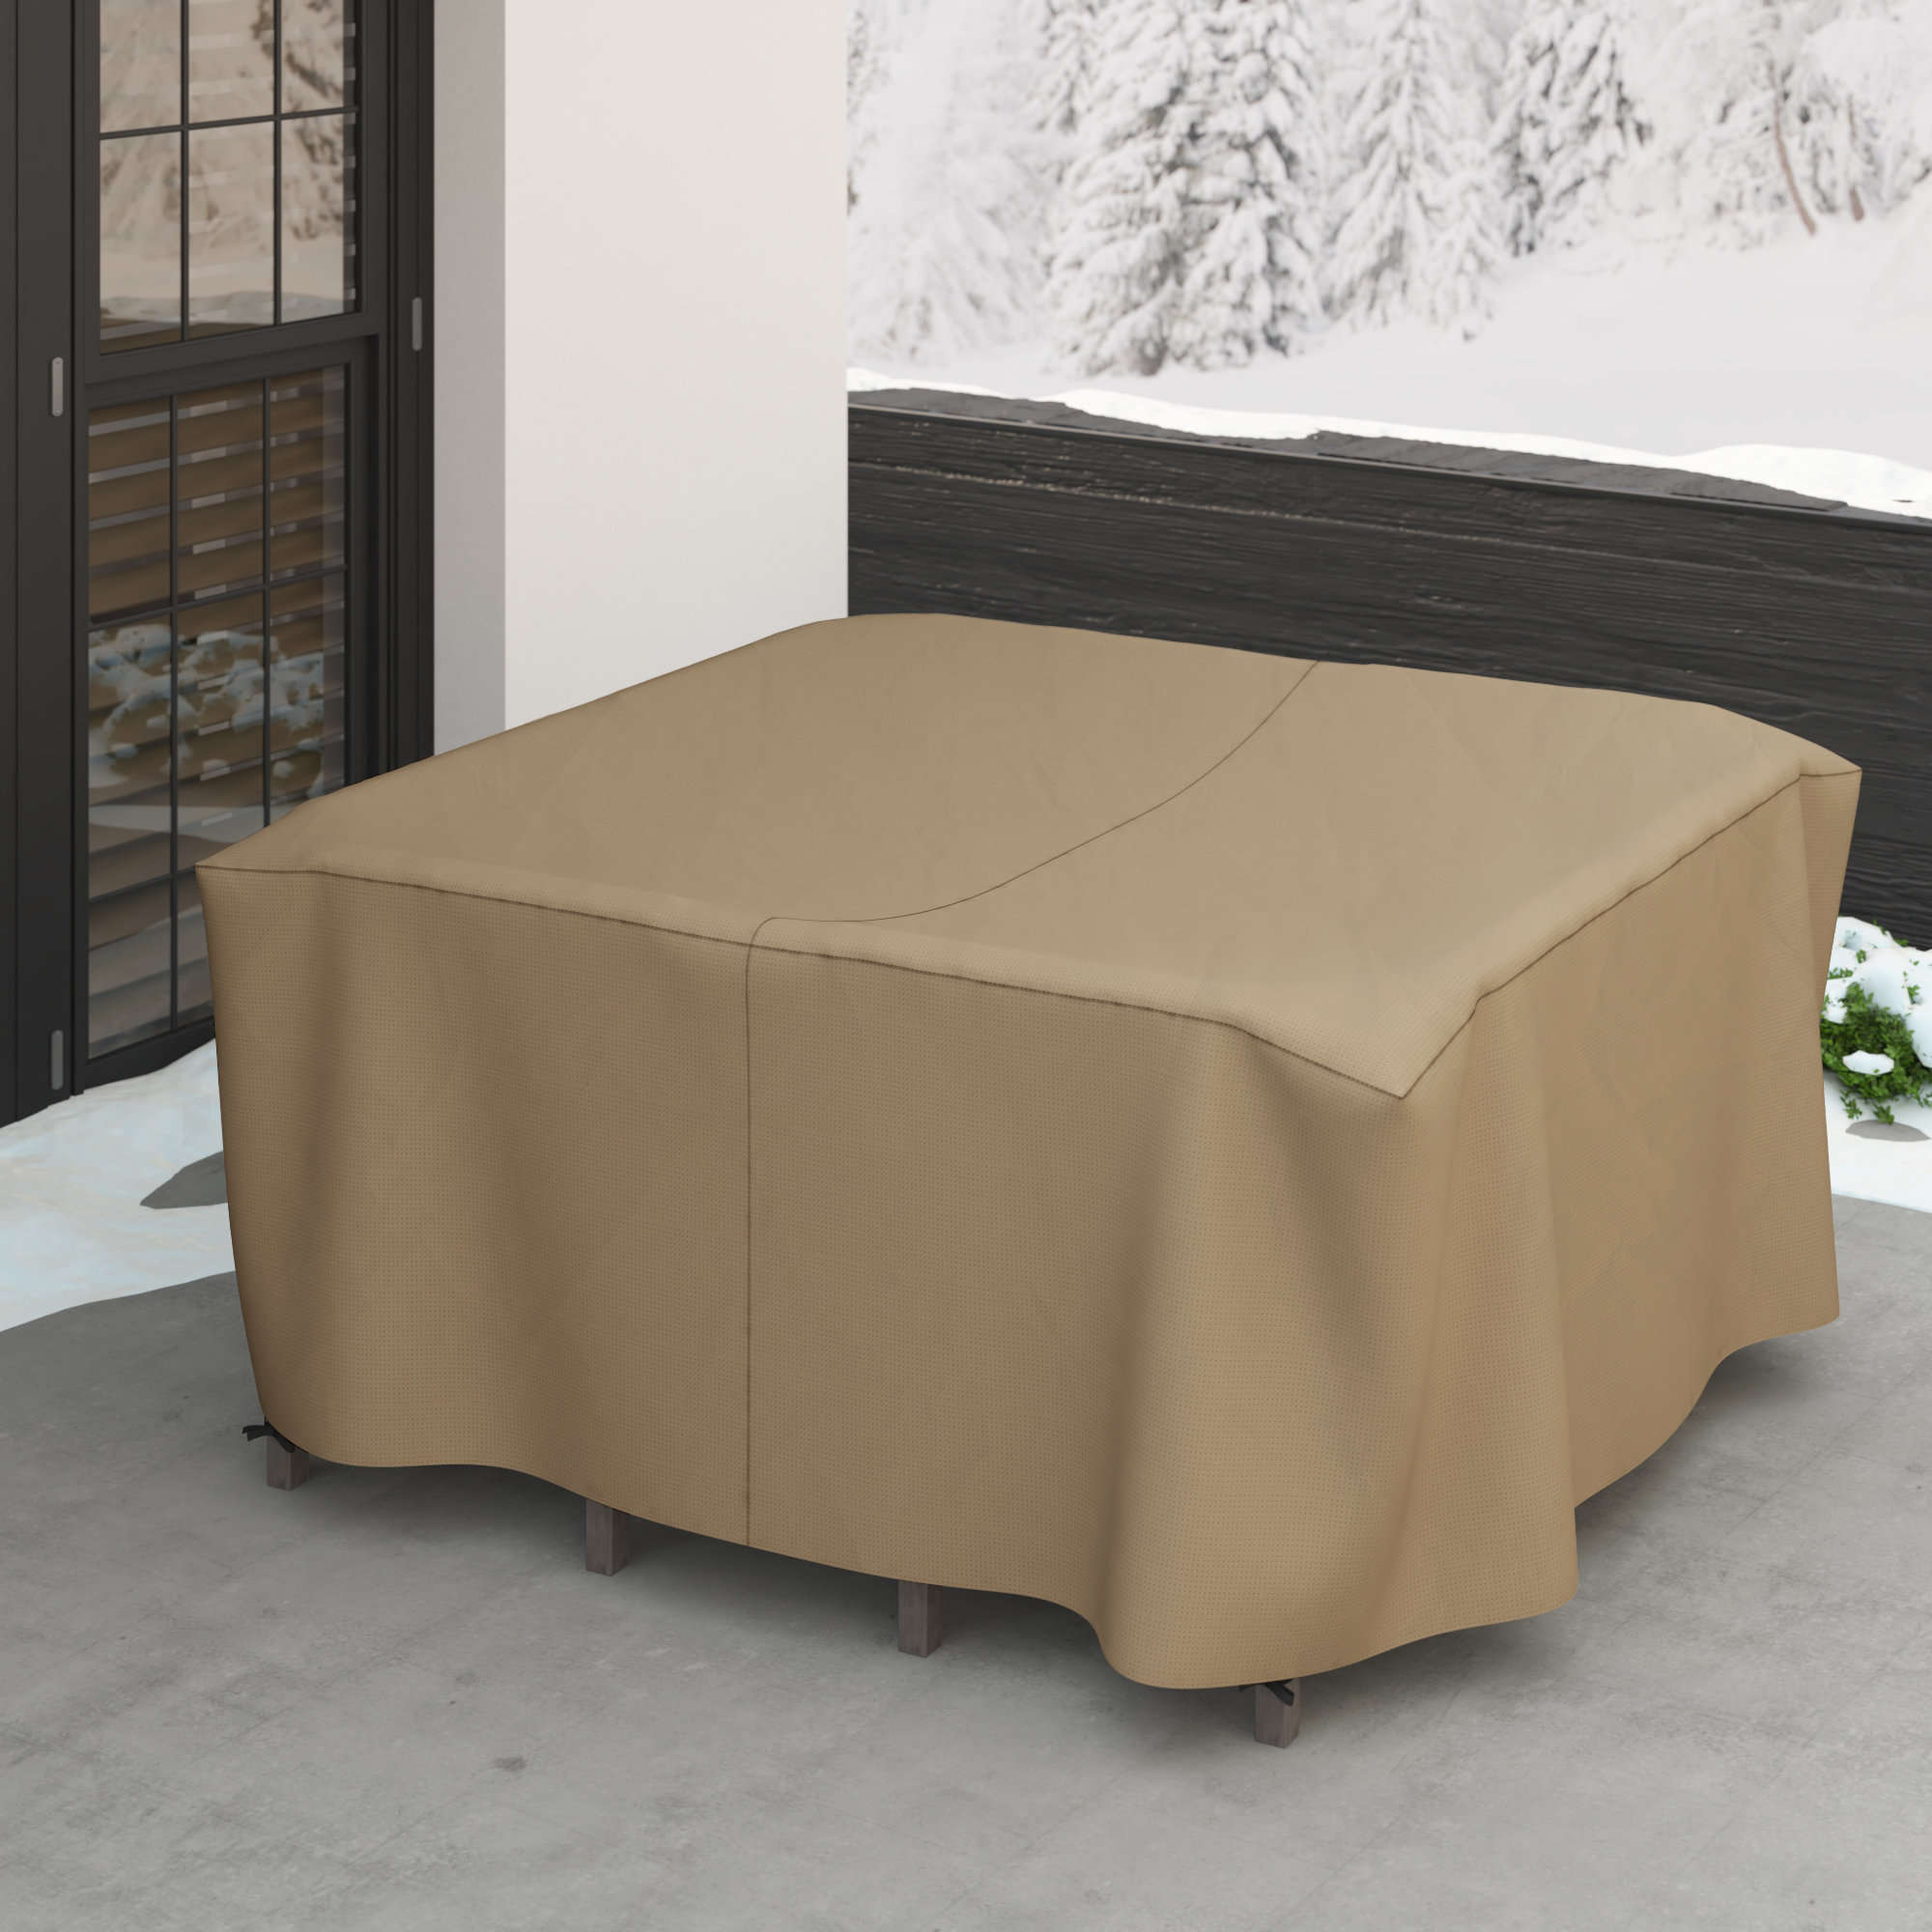 100% Weather Resistant Outdoor Cover with Elastic for Snug Fit 21 Dia x 18 H, Beige Customize Cover with Any Size Bird Bath Cover 12 Oz Waterproof 